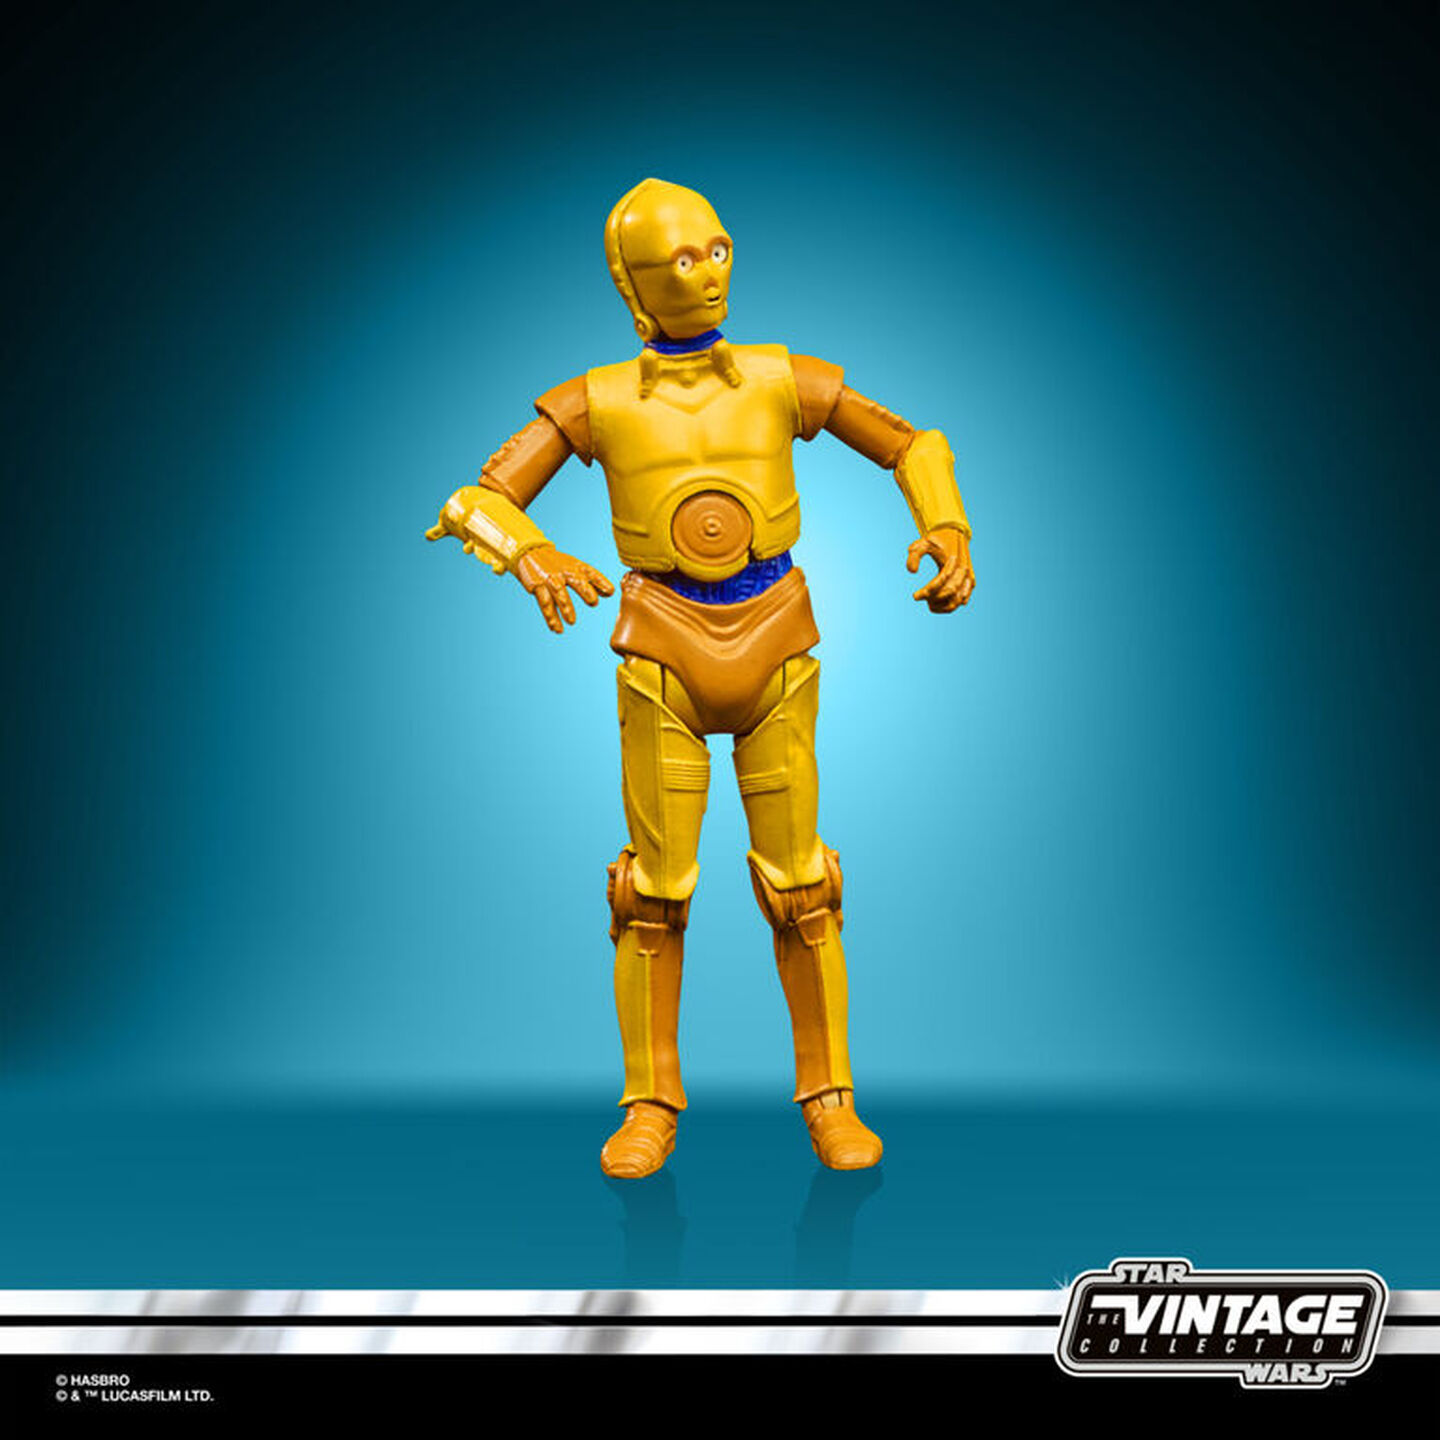 Star Wars The Vintage Collection C-3PO Toy